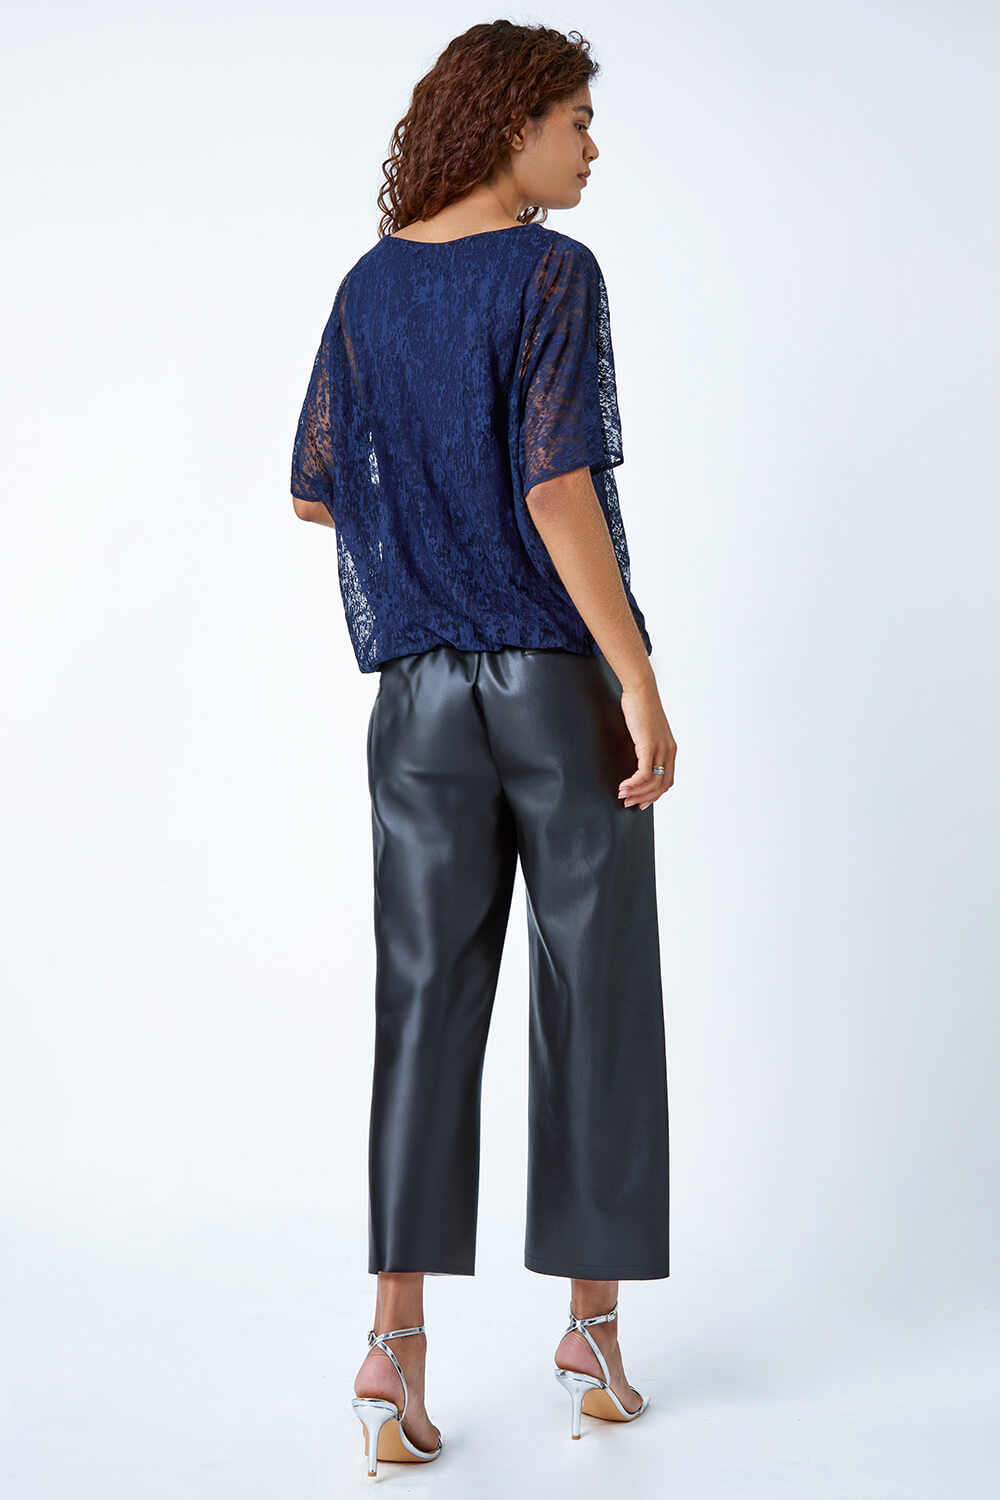 Midnight Blue Textured Animal Blouson Stretch Top, Image 3 of 5